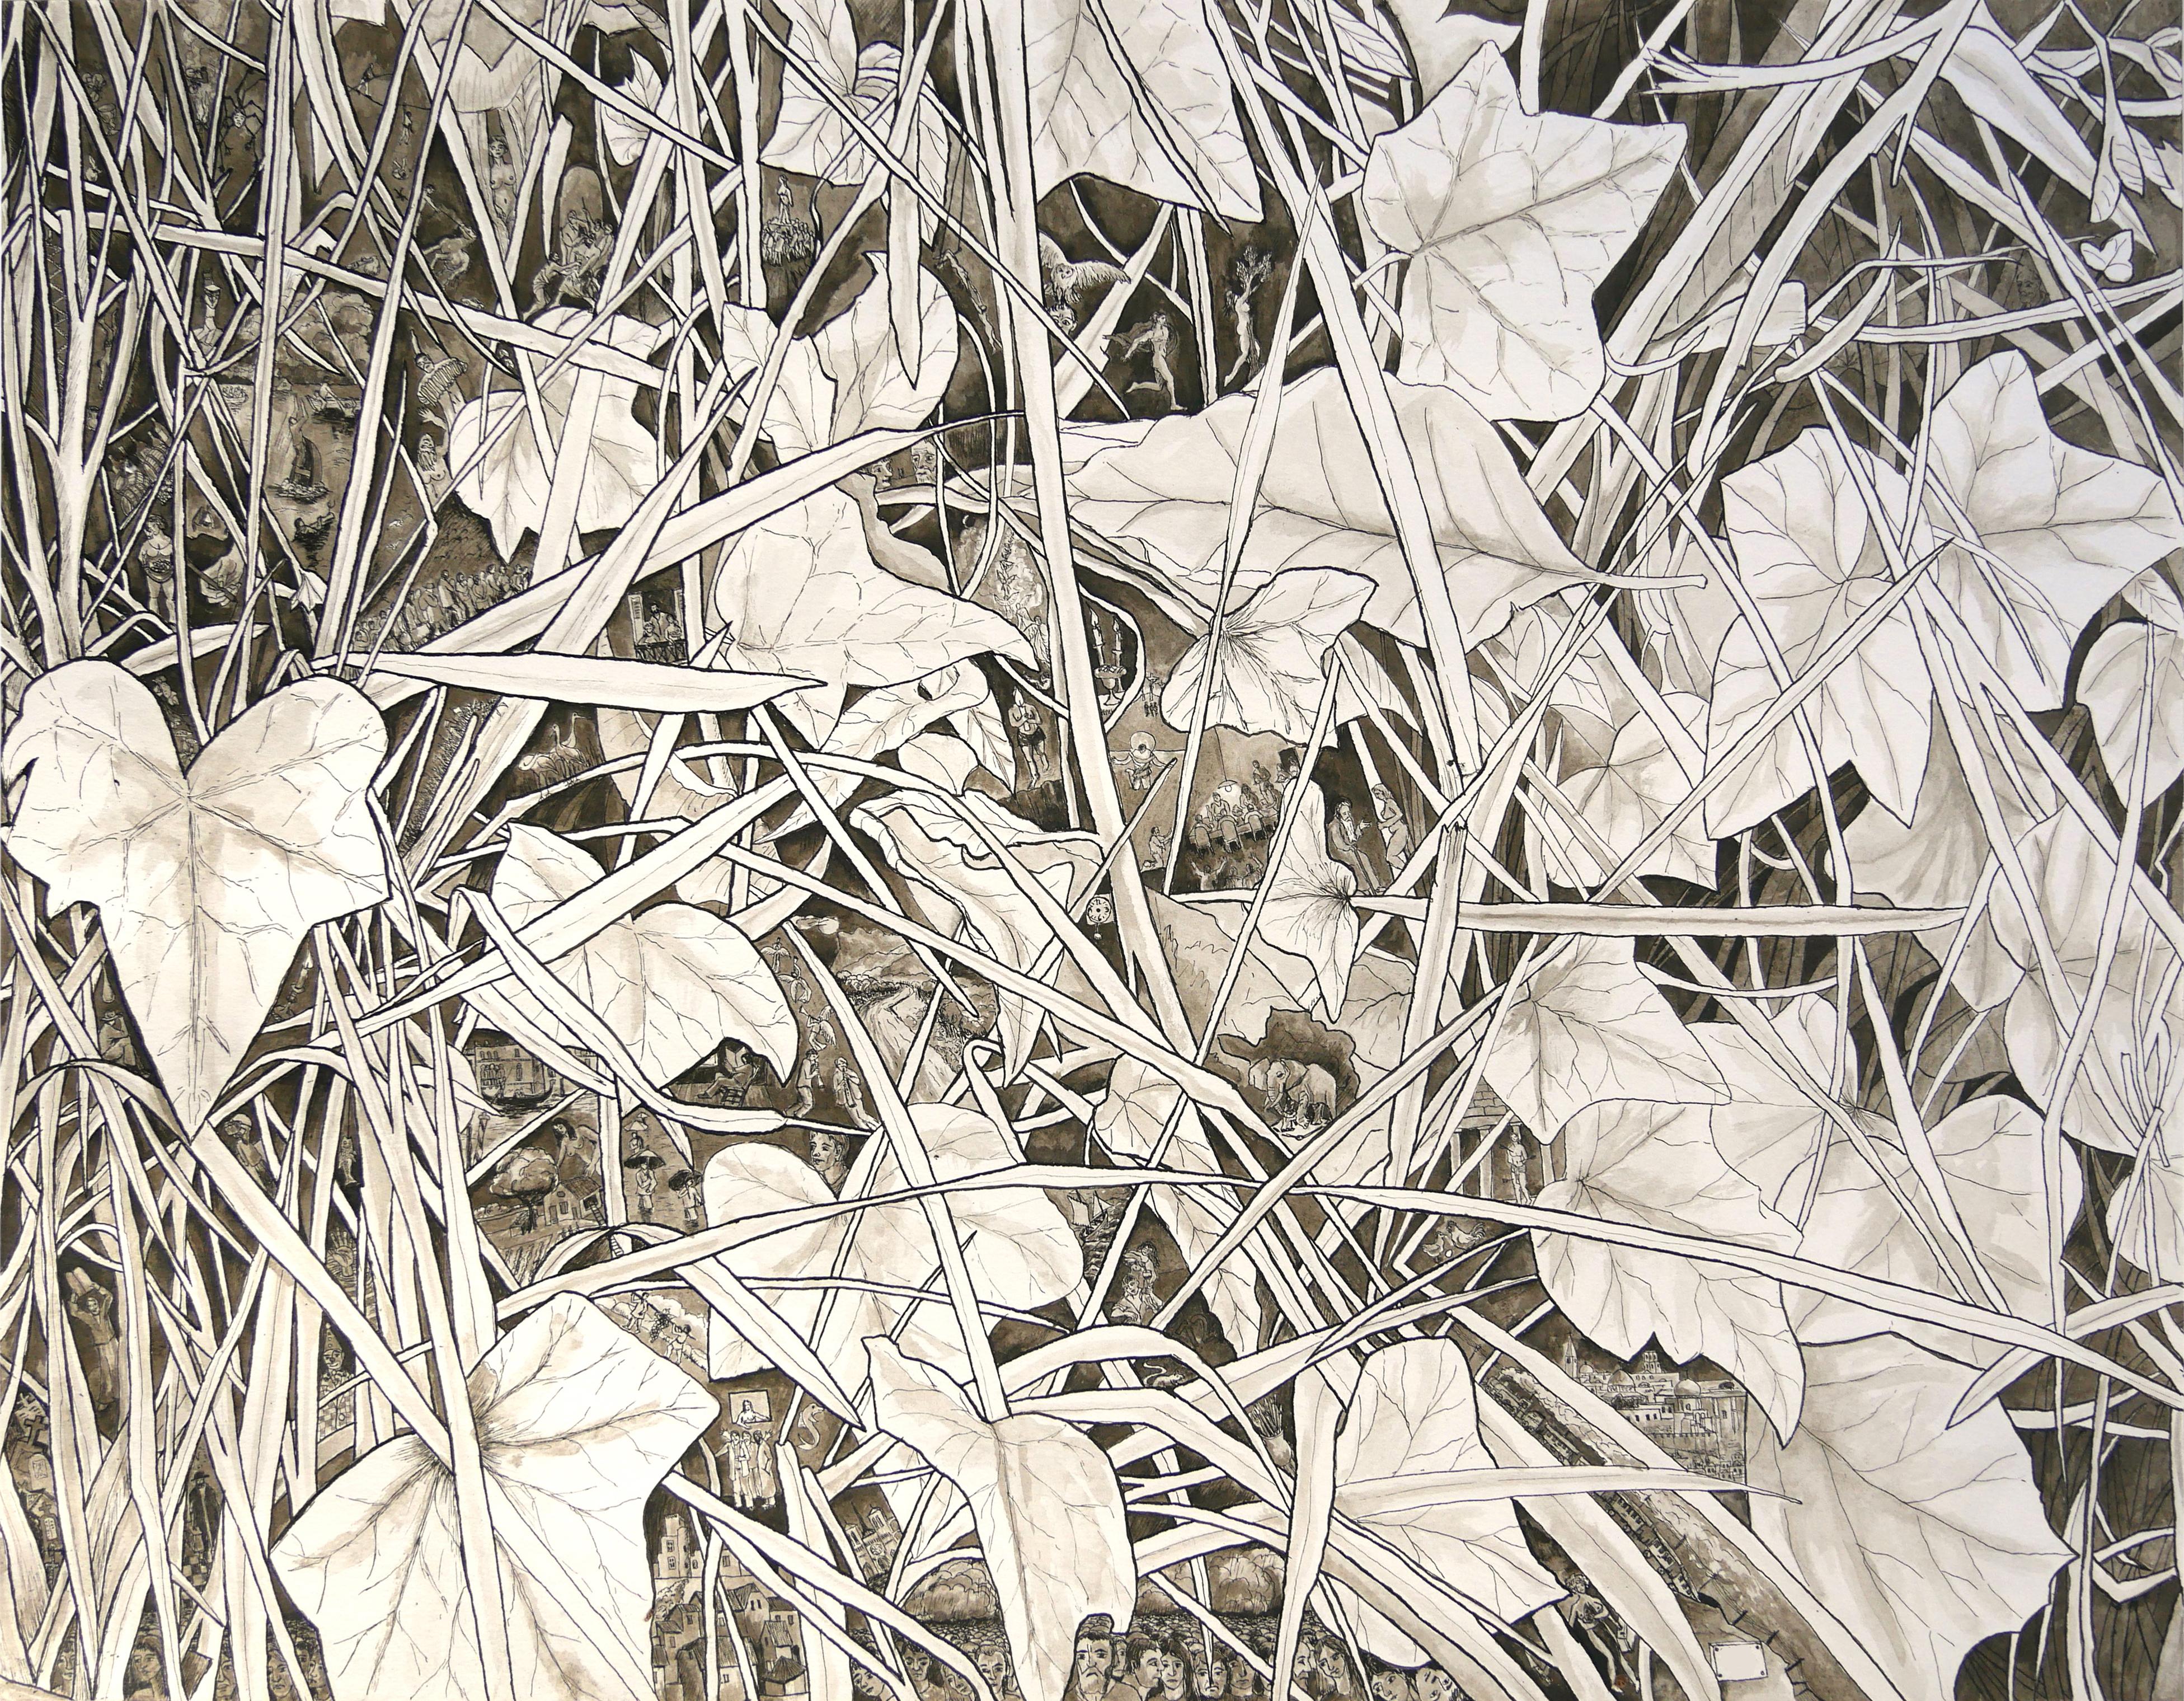 « Edge of the Path », Grass Inhabited by Human, Chinese Encre and Wash Drawing (Le bord du chemin), dessin humain 